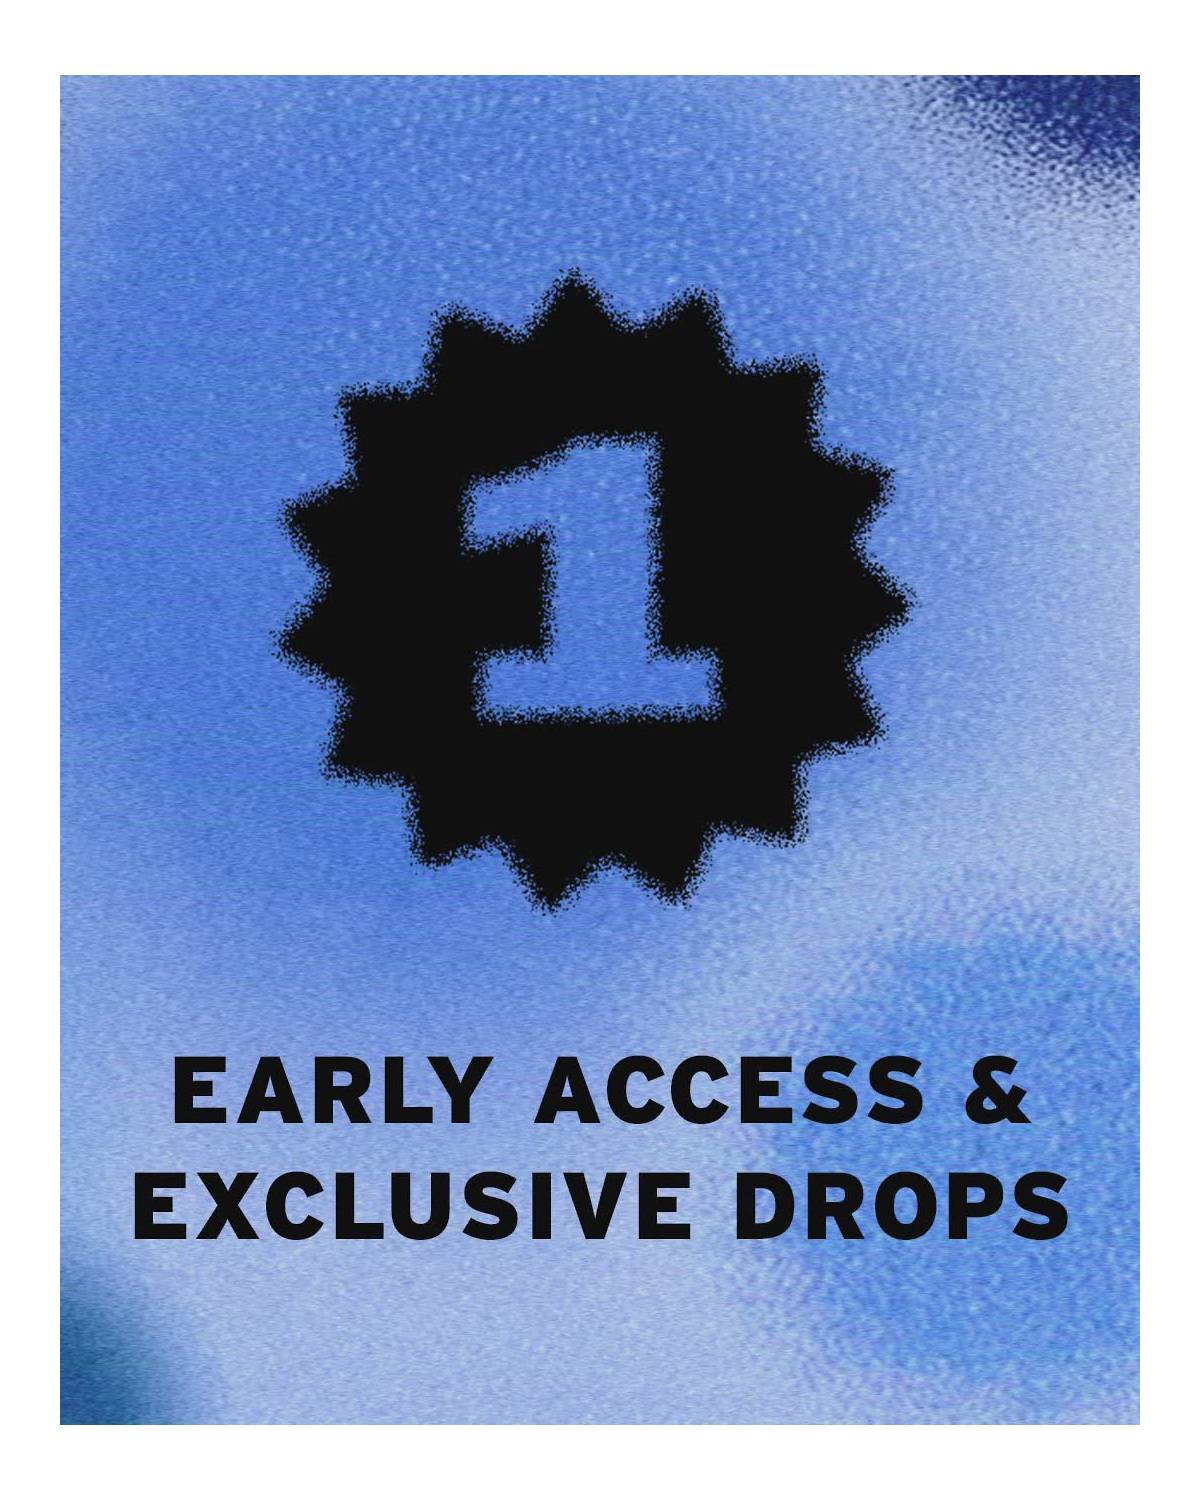 Icon of the number 1 and the words "Early Access & Exclusive Drops" overlayed on a blue background.